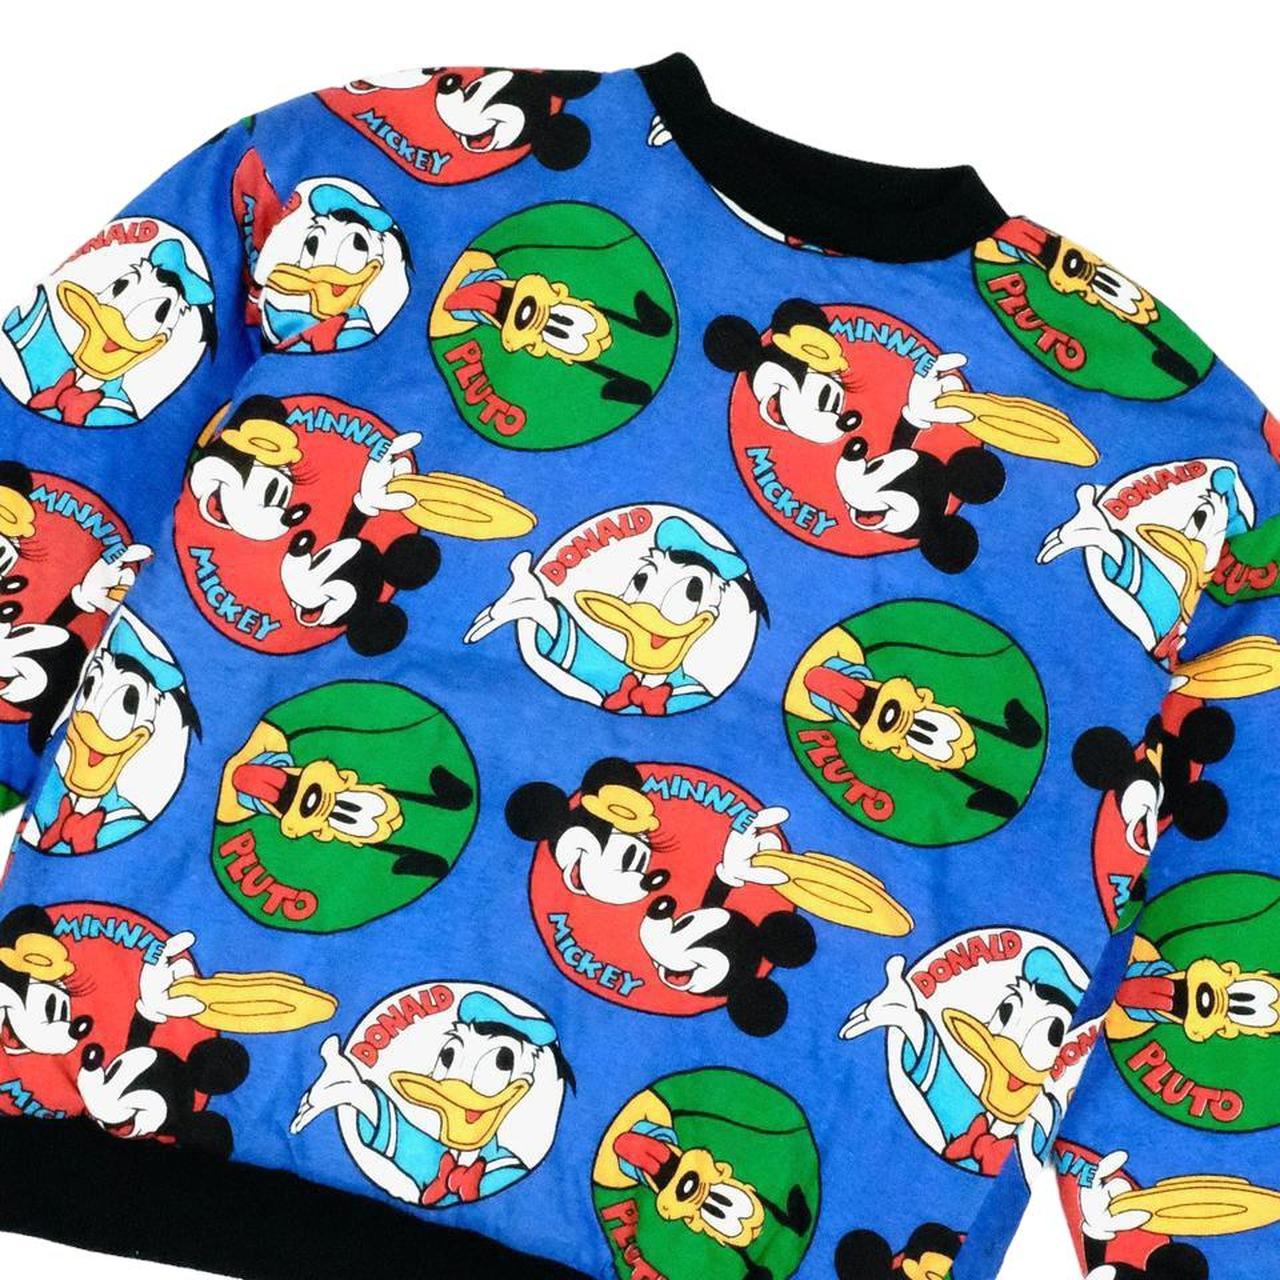 Mickey Mouse Jumper